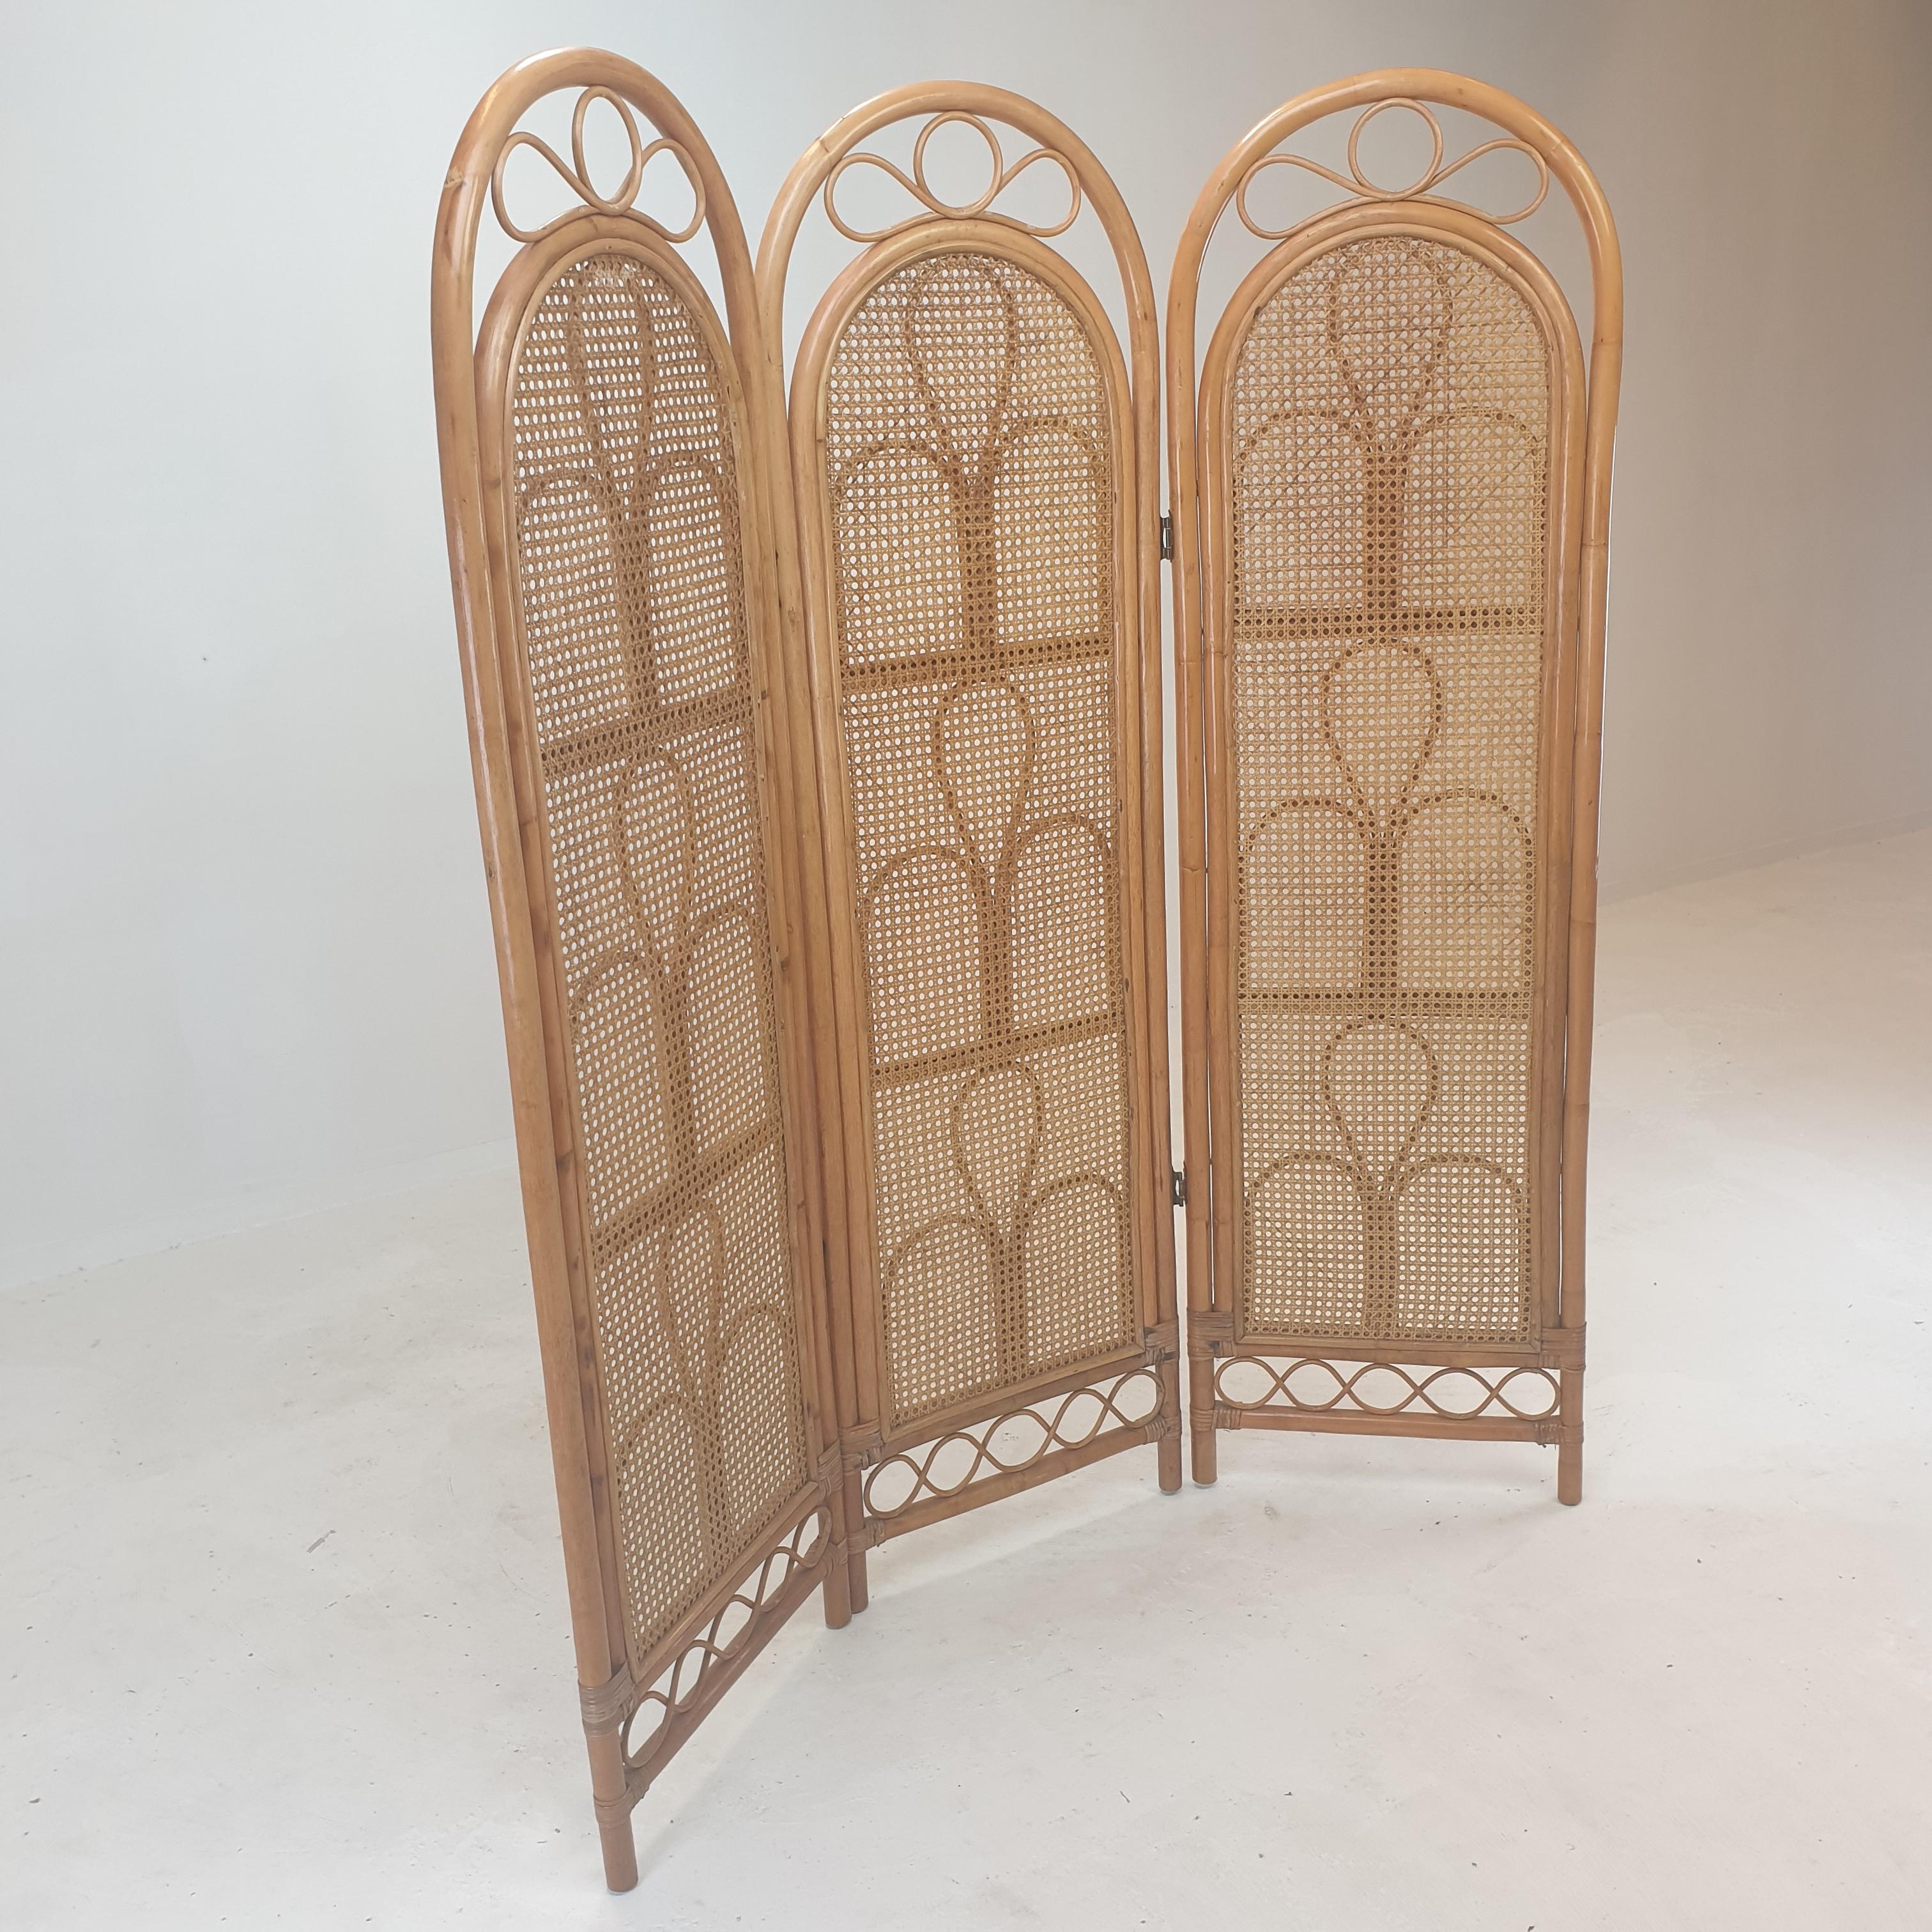 Italian Room Divider in Rattan and Wicker, 1960s For Sale 3